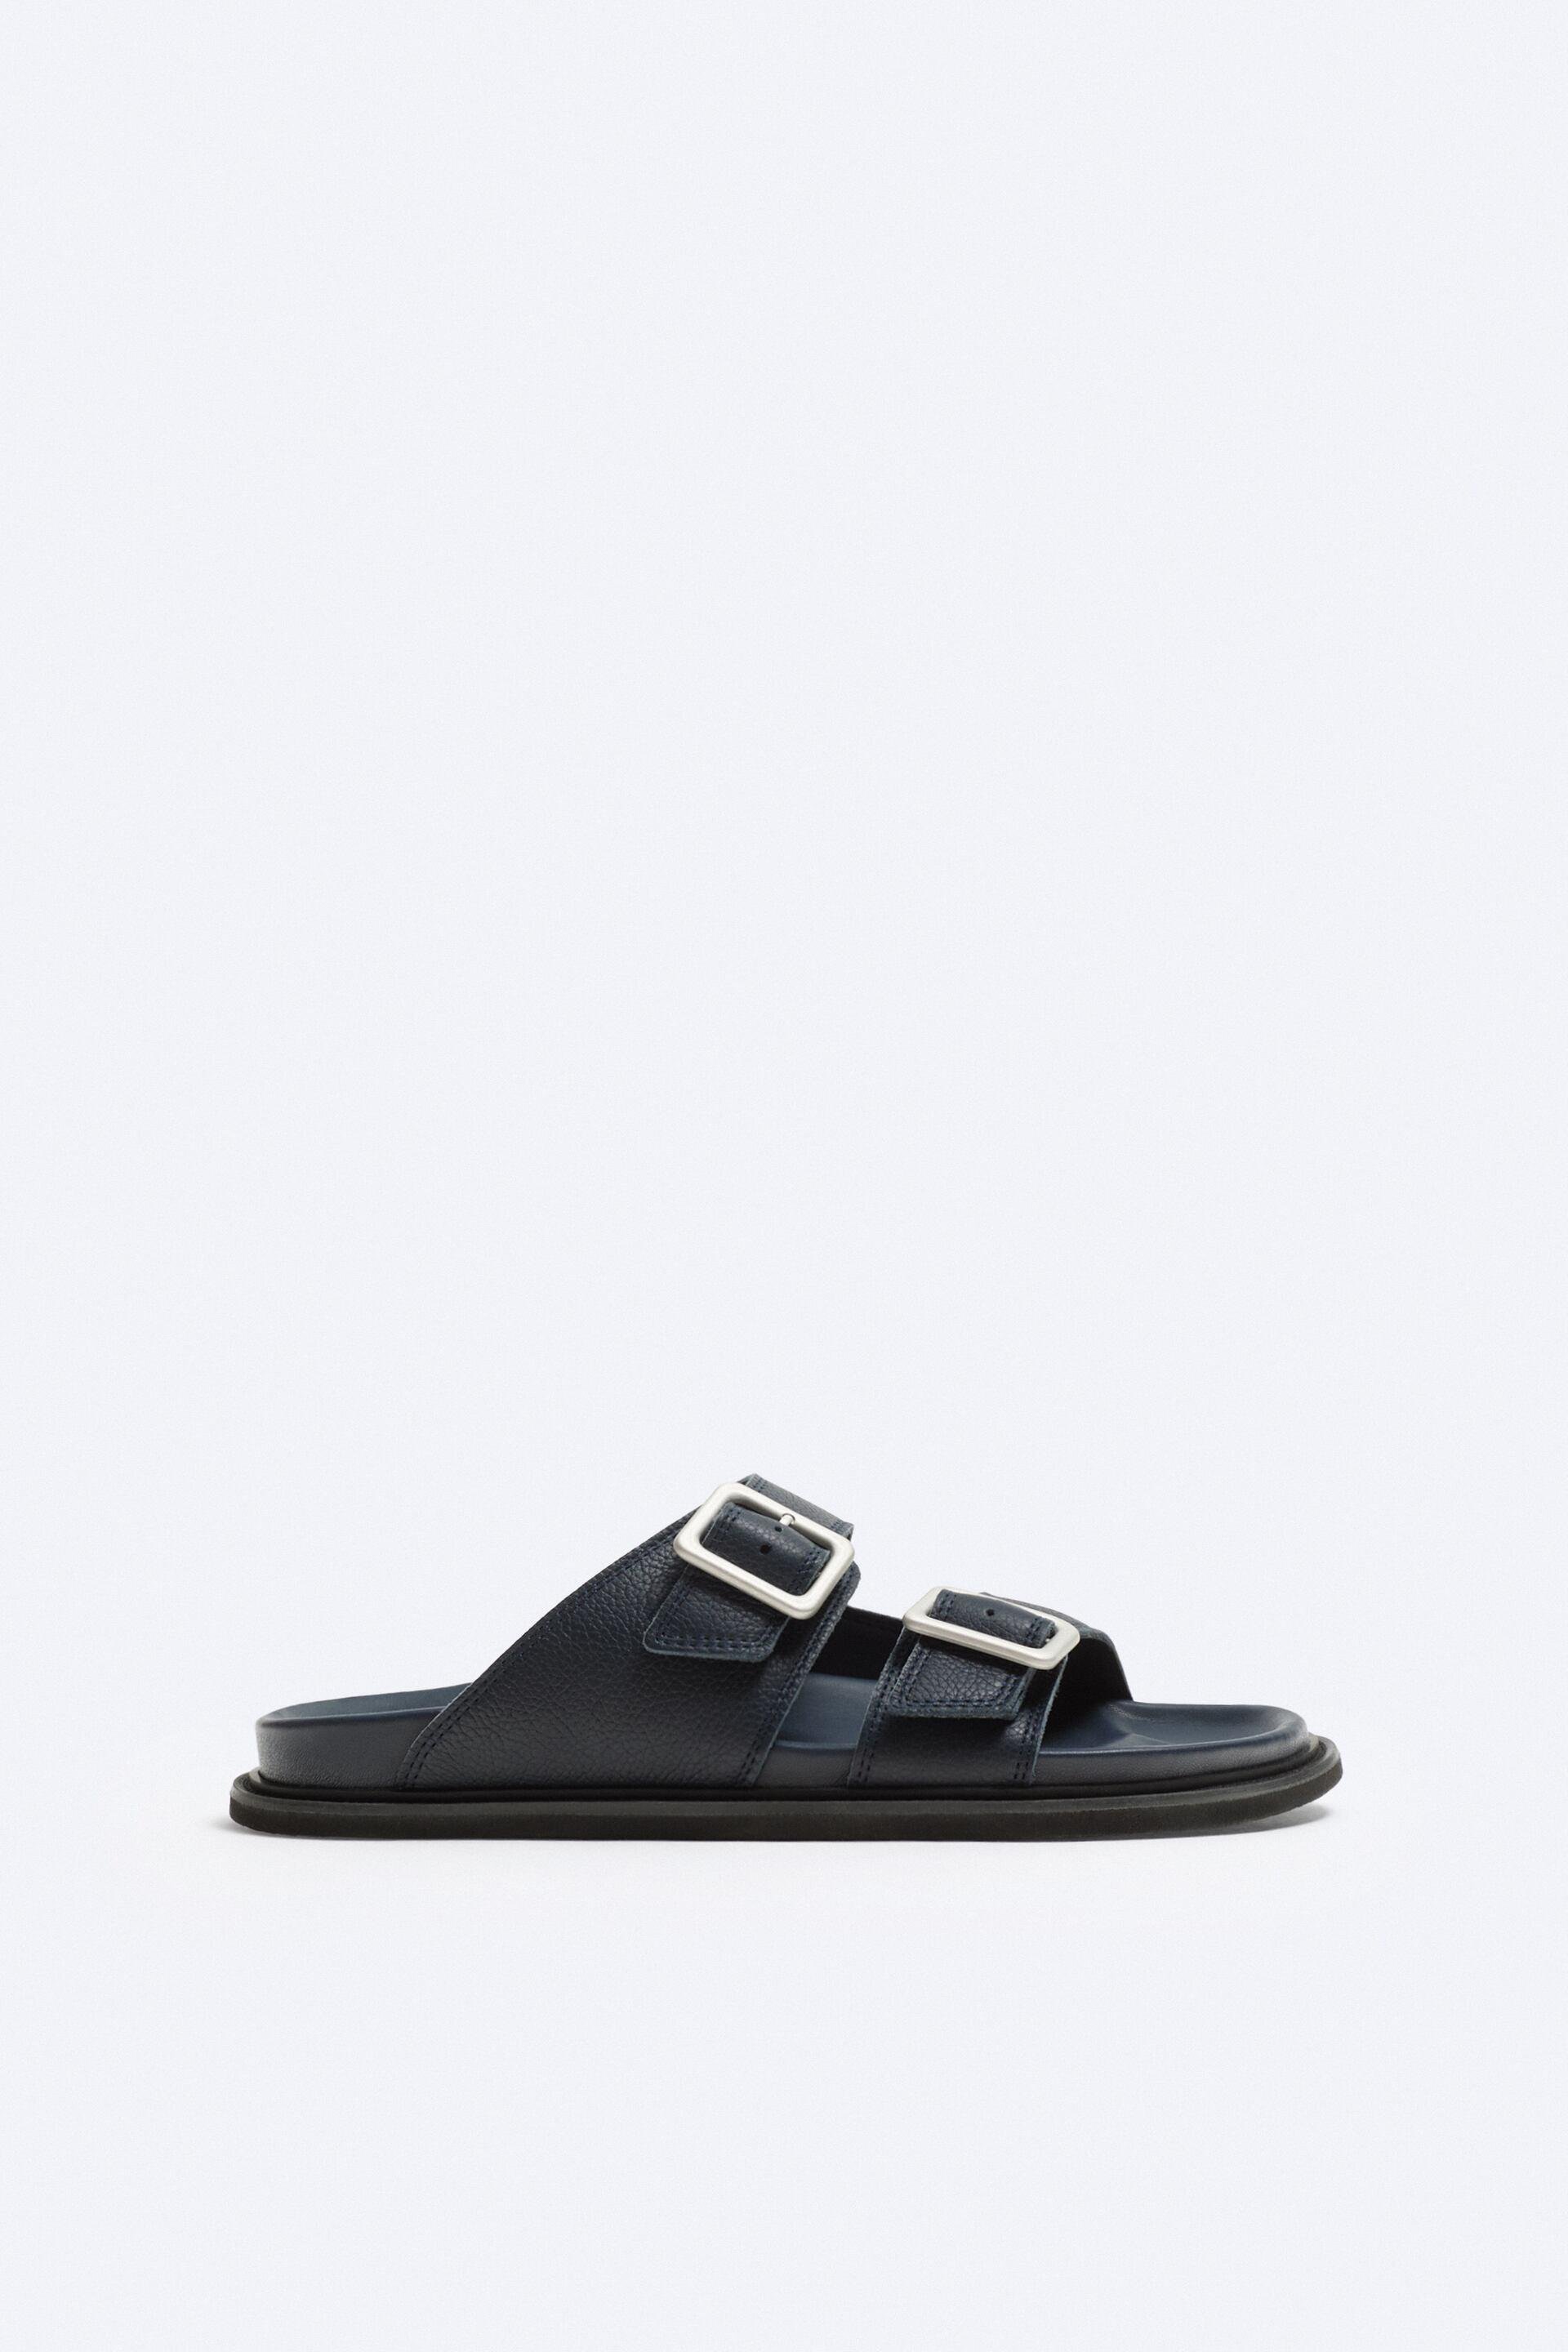 DOUBLE STRAP BUCKLE LEATHER SANDALS by ZARA